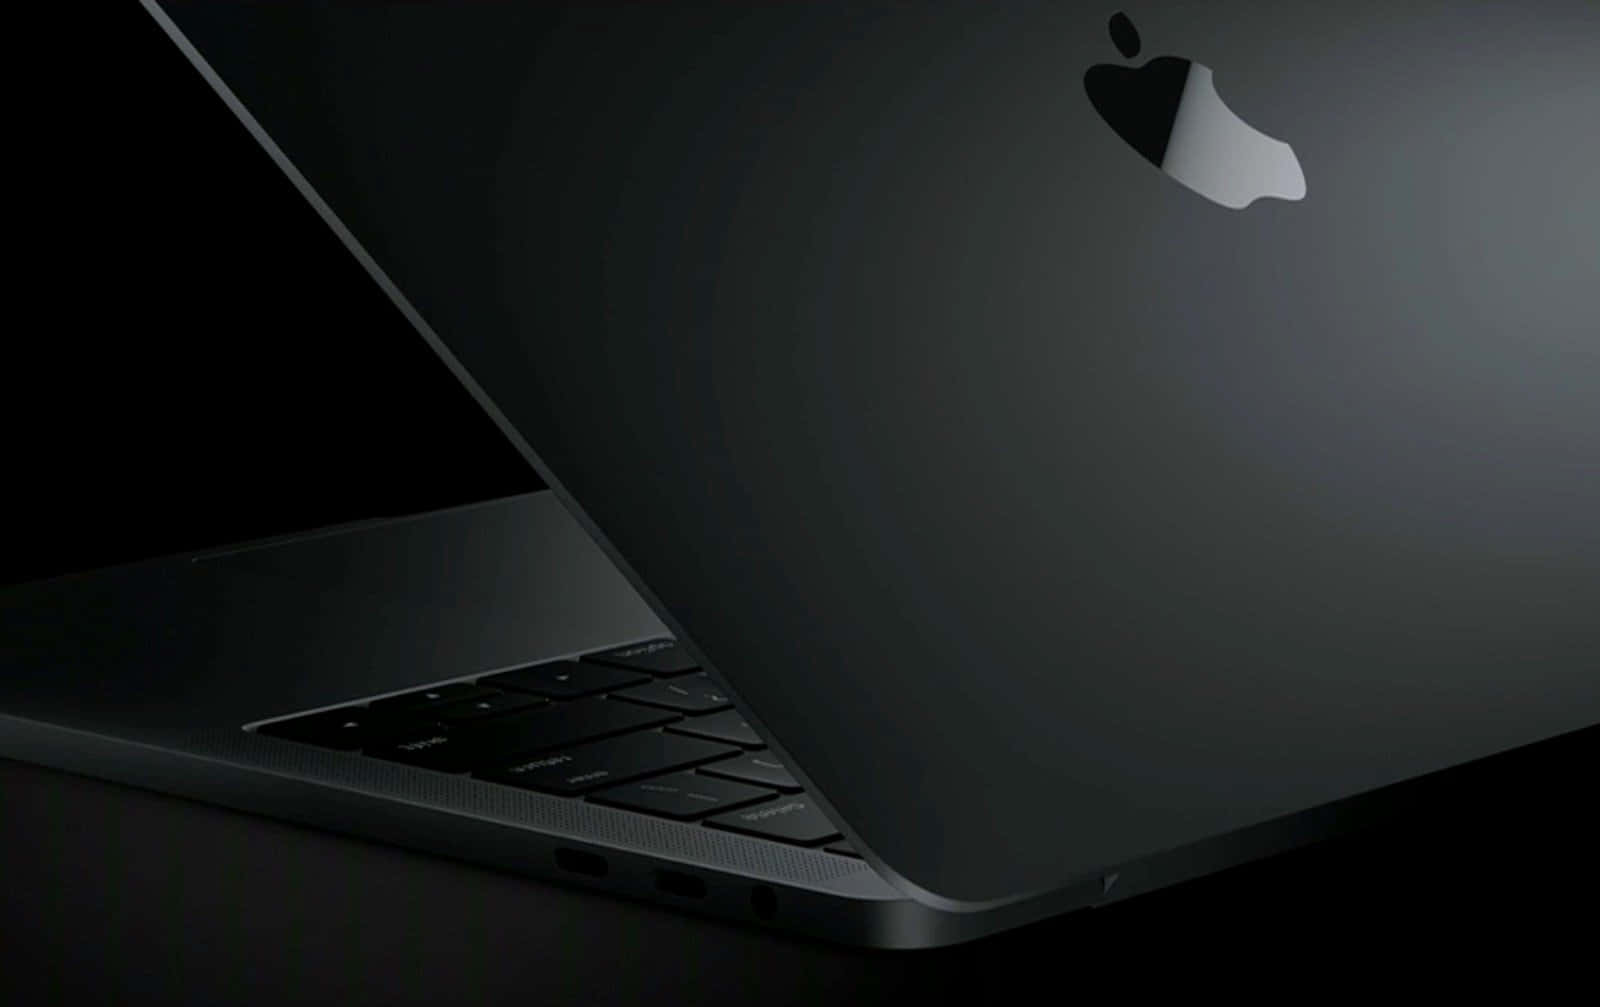 The sophisticated and stylish Black Macbook Wallpaper